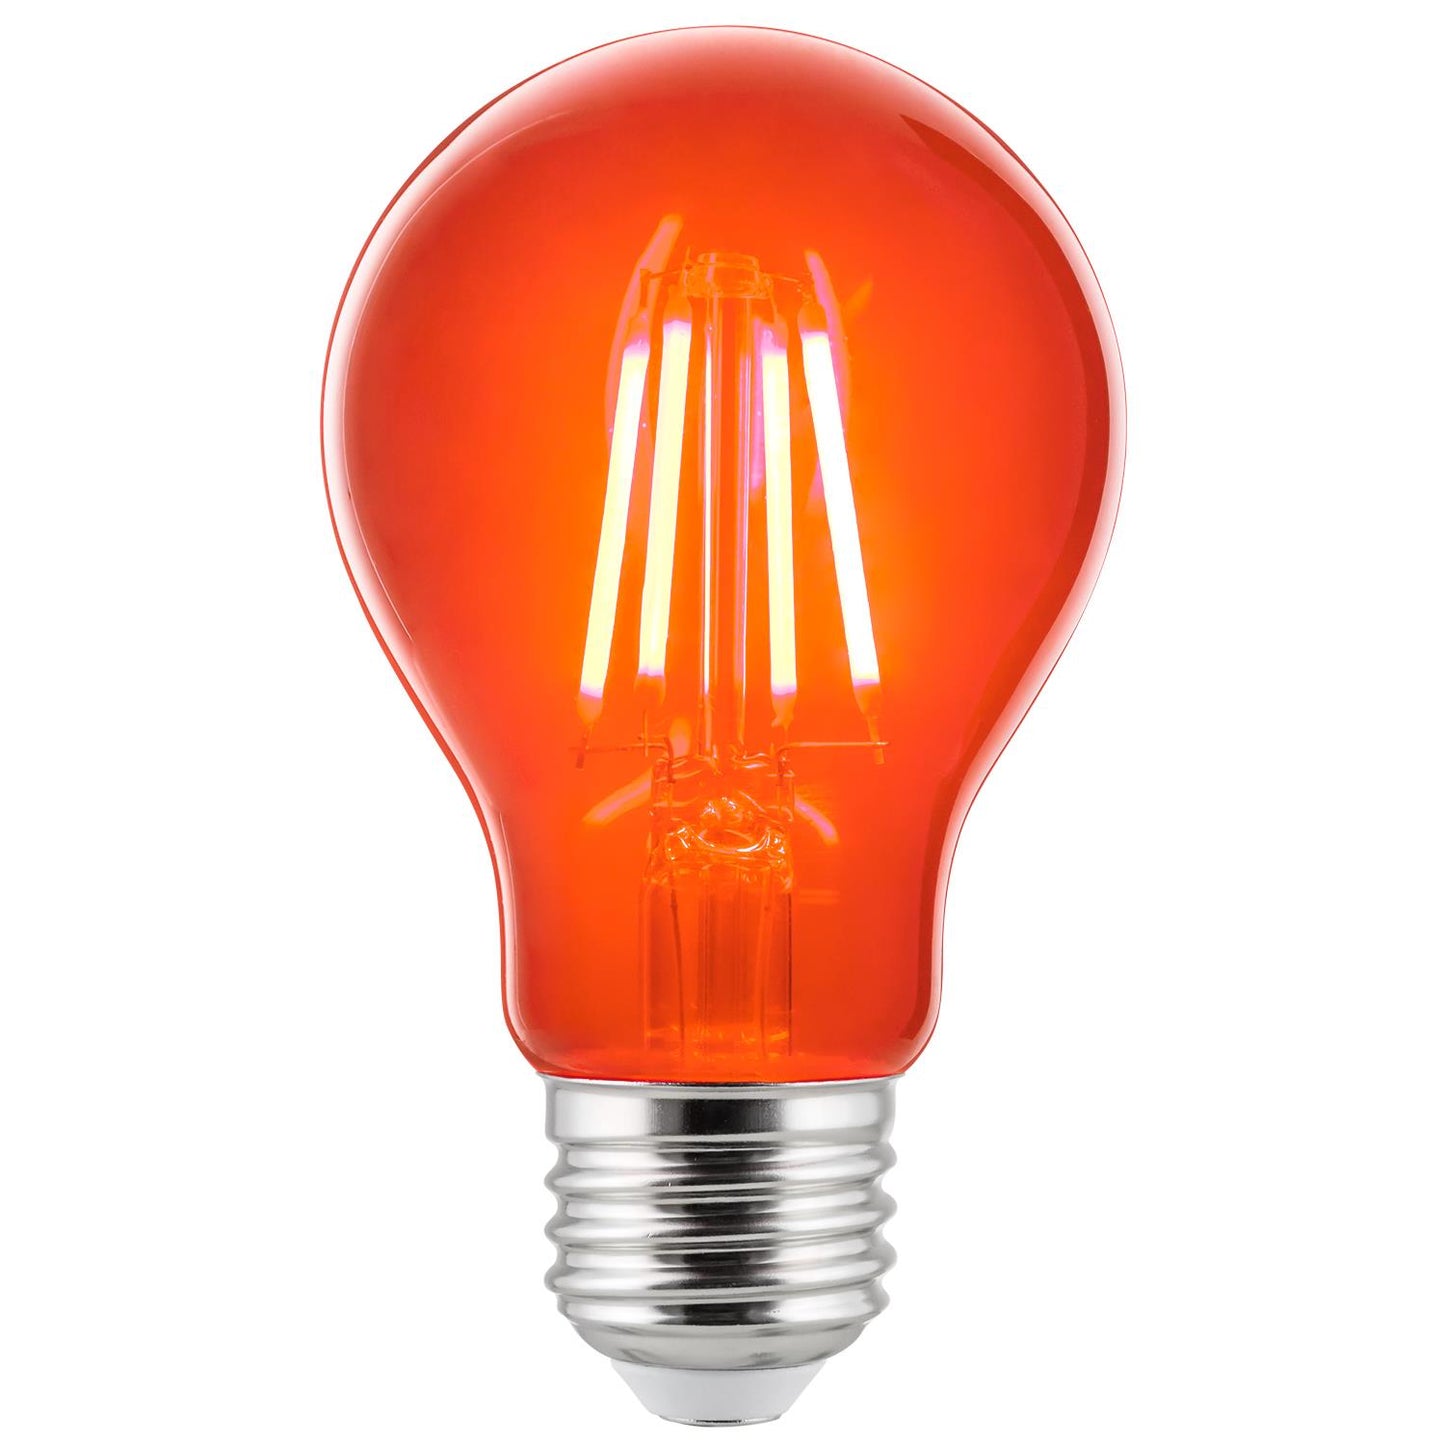 2-Pack Sunlite LED Transparent Orange A19 Filament Bulbs, 4.5 Watts, Dimmable, UL Listed